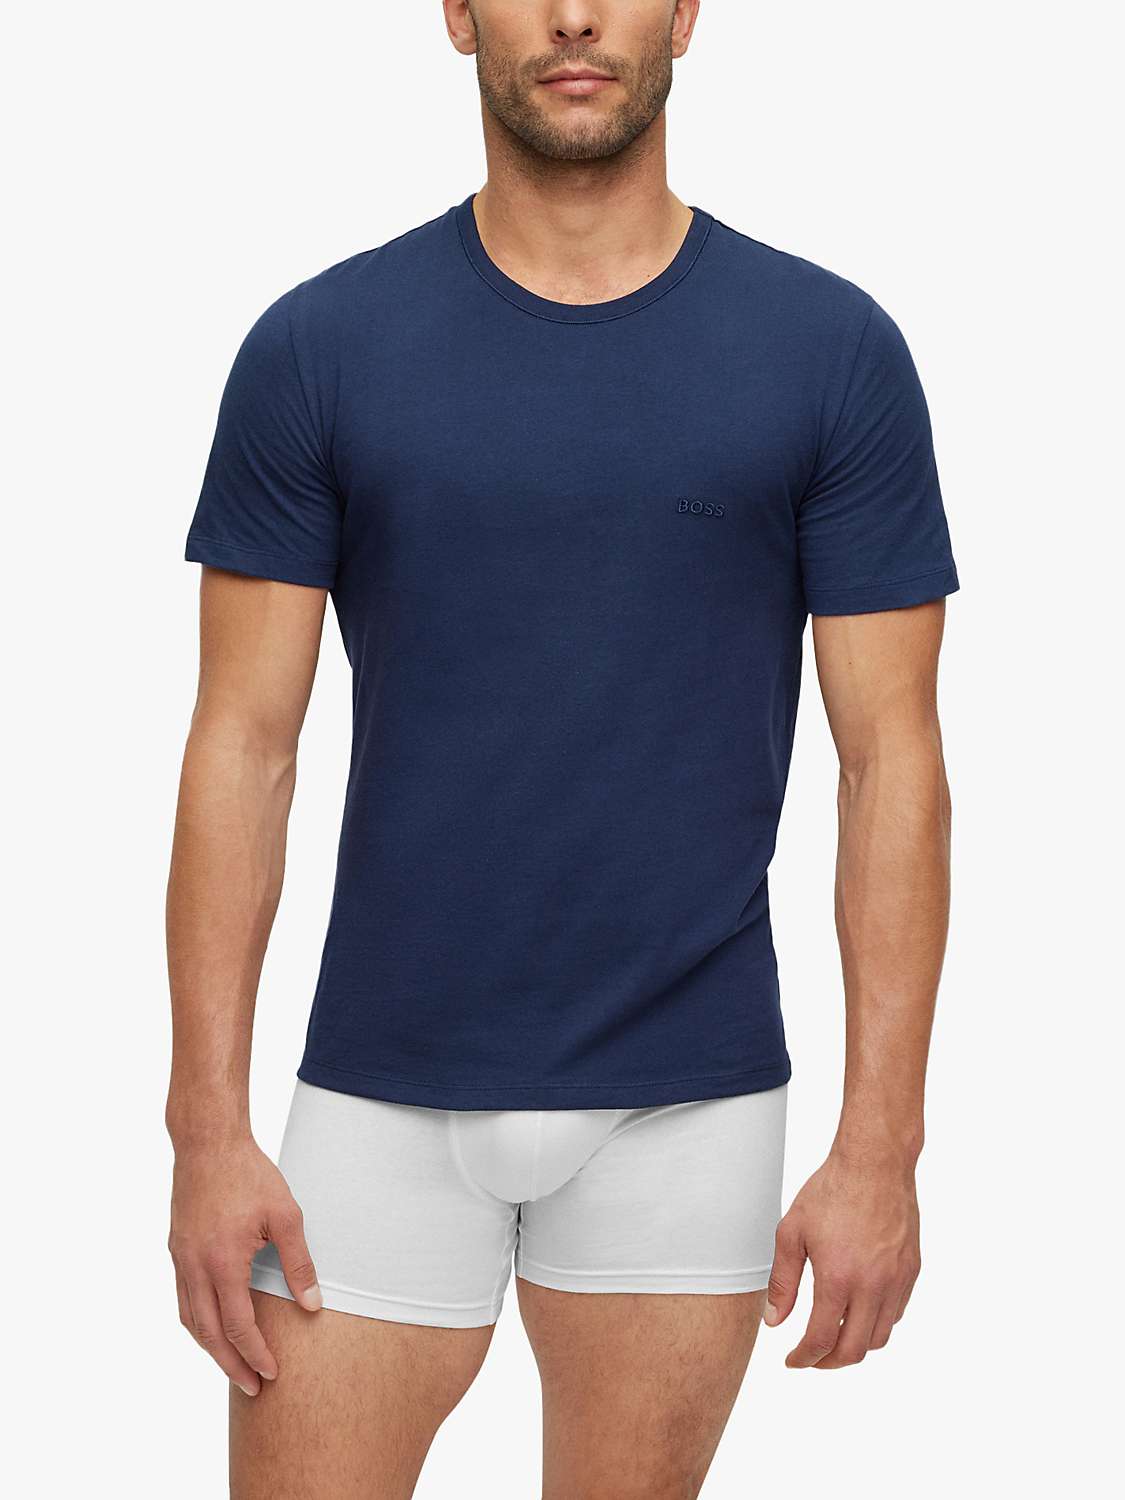 Buy HUGO BOSS Embroidered logo Cotton T-shirt, Pack of 3, Open Blue/Multi Online at johnlewis.com